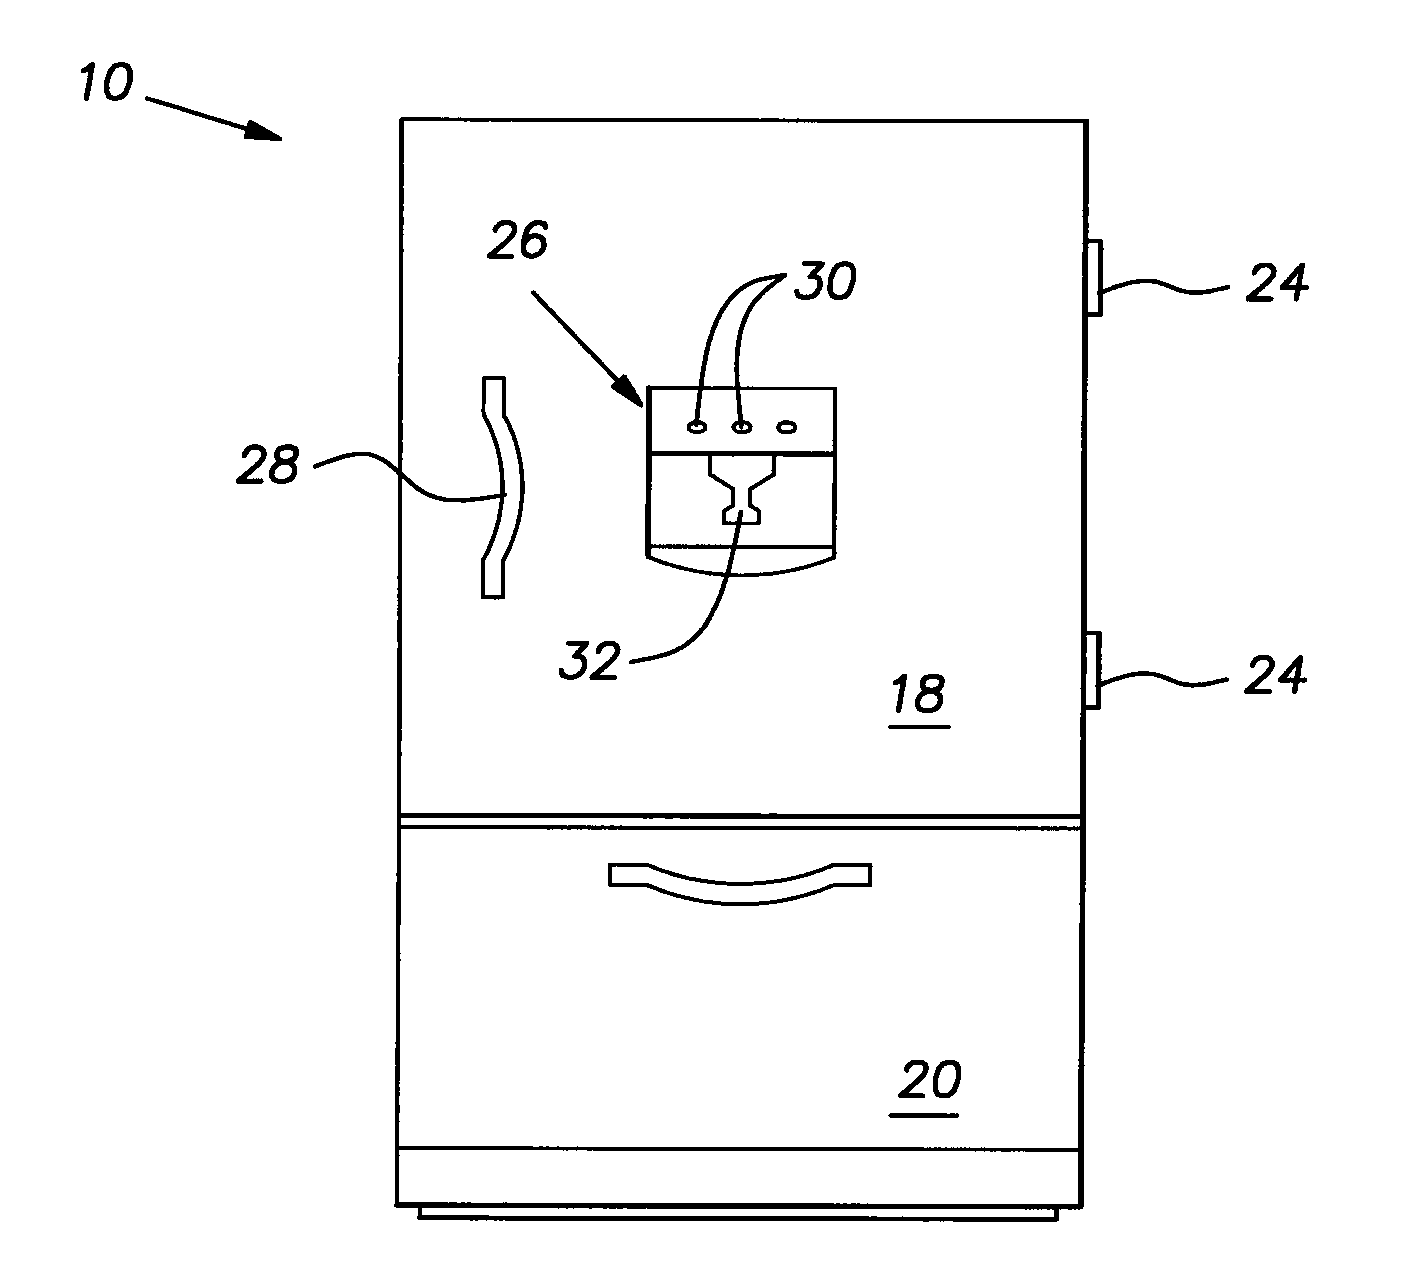 Method and apparatus for making clear ice